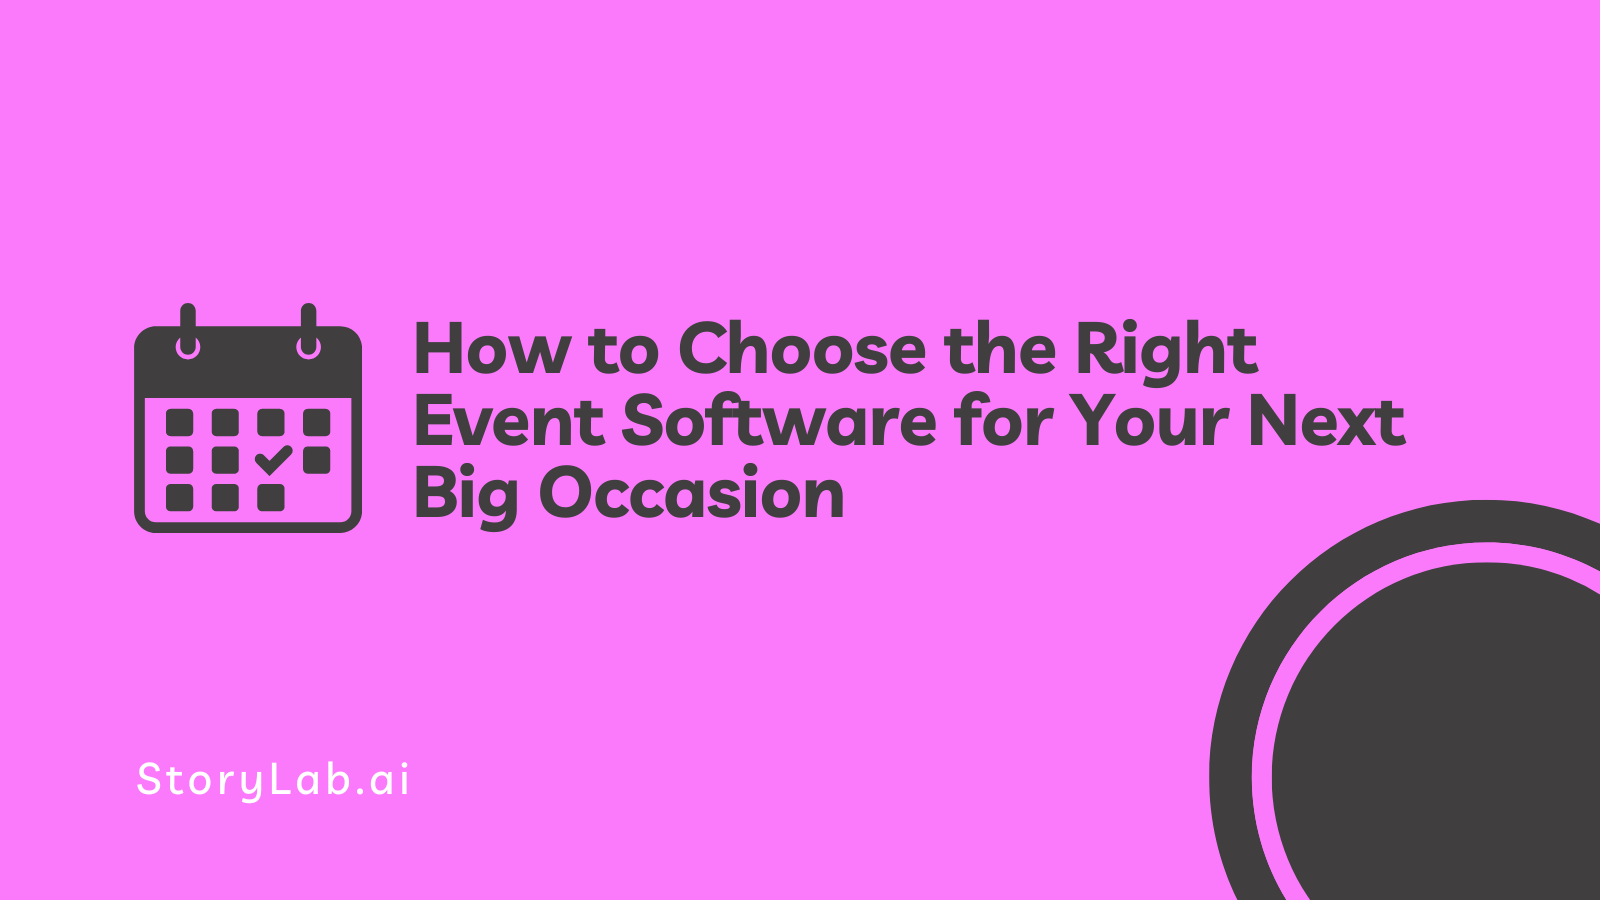 How to Choose the Right Event Software for Your Next Big Occasion